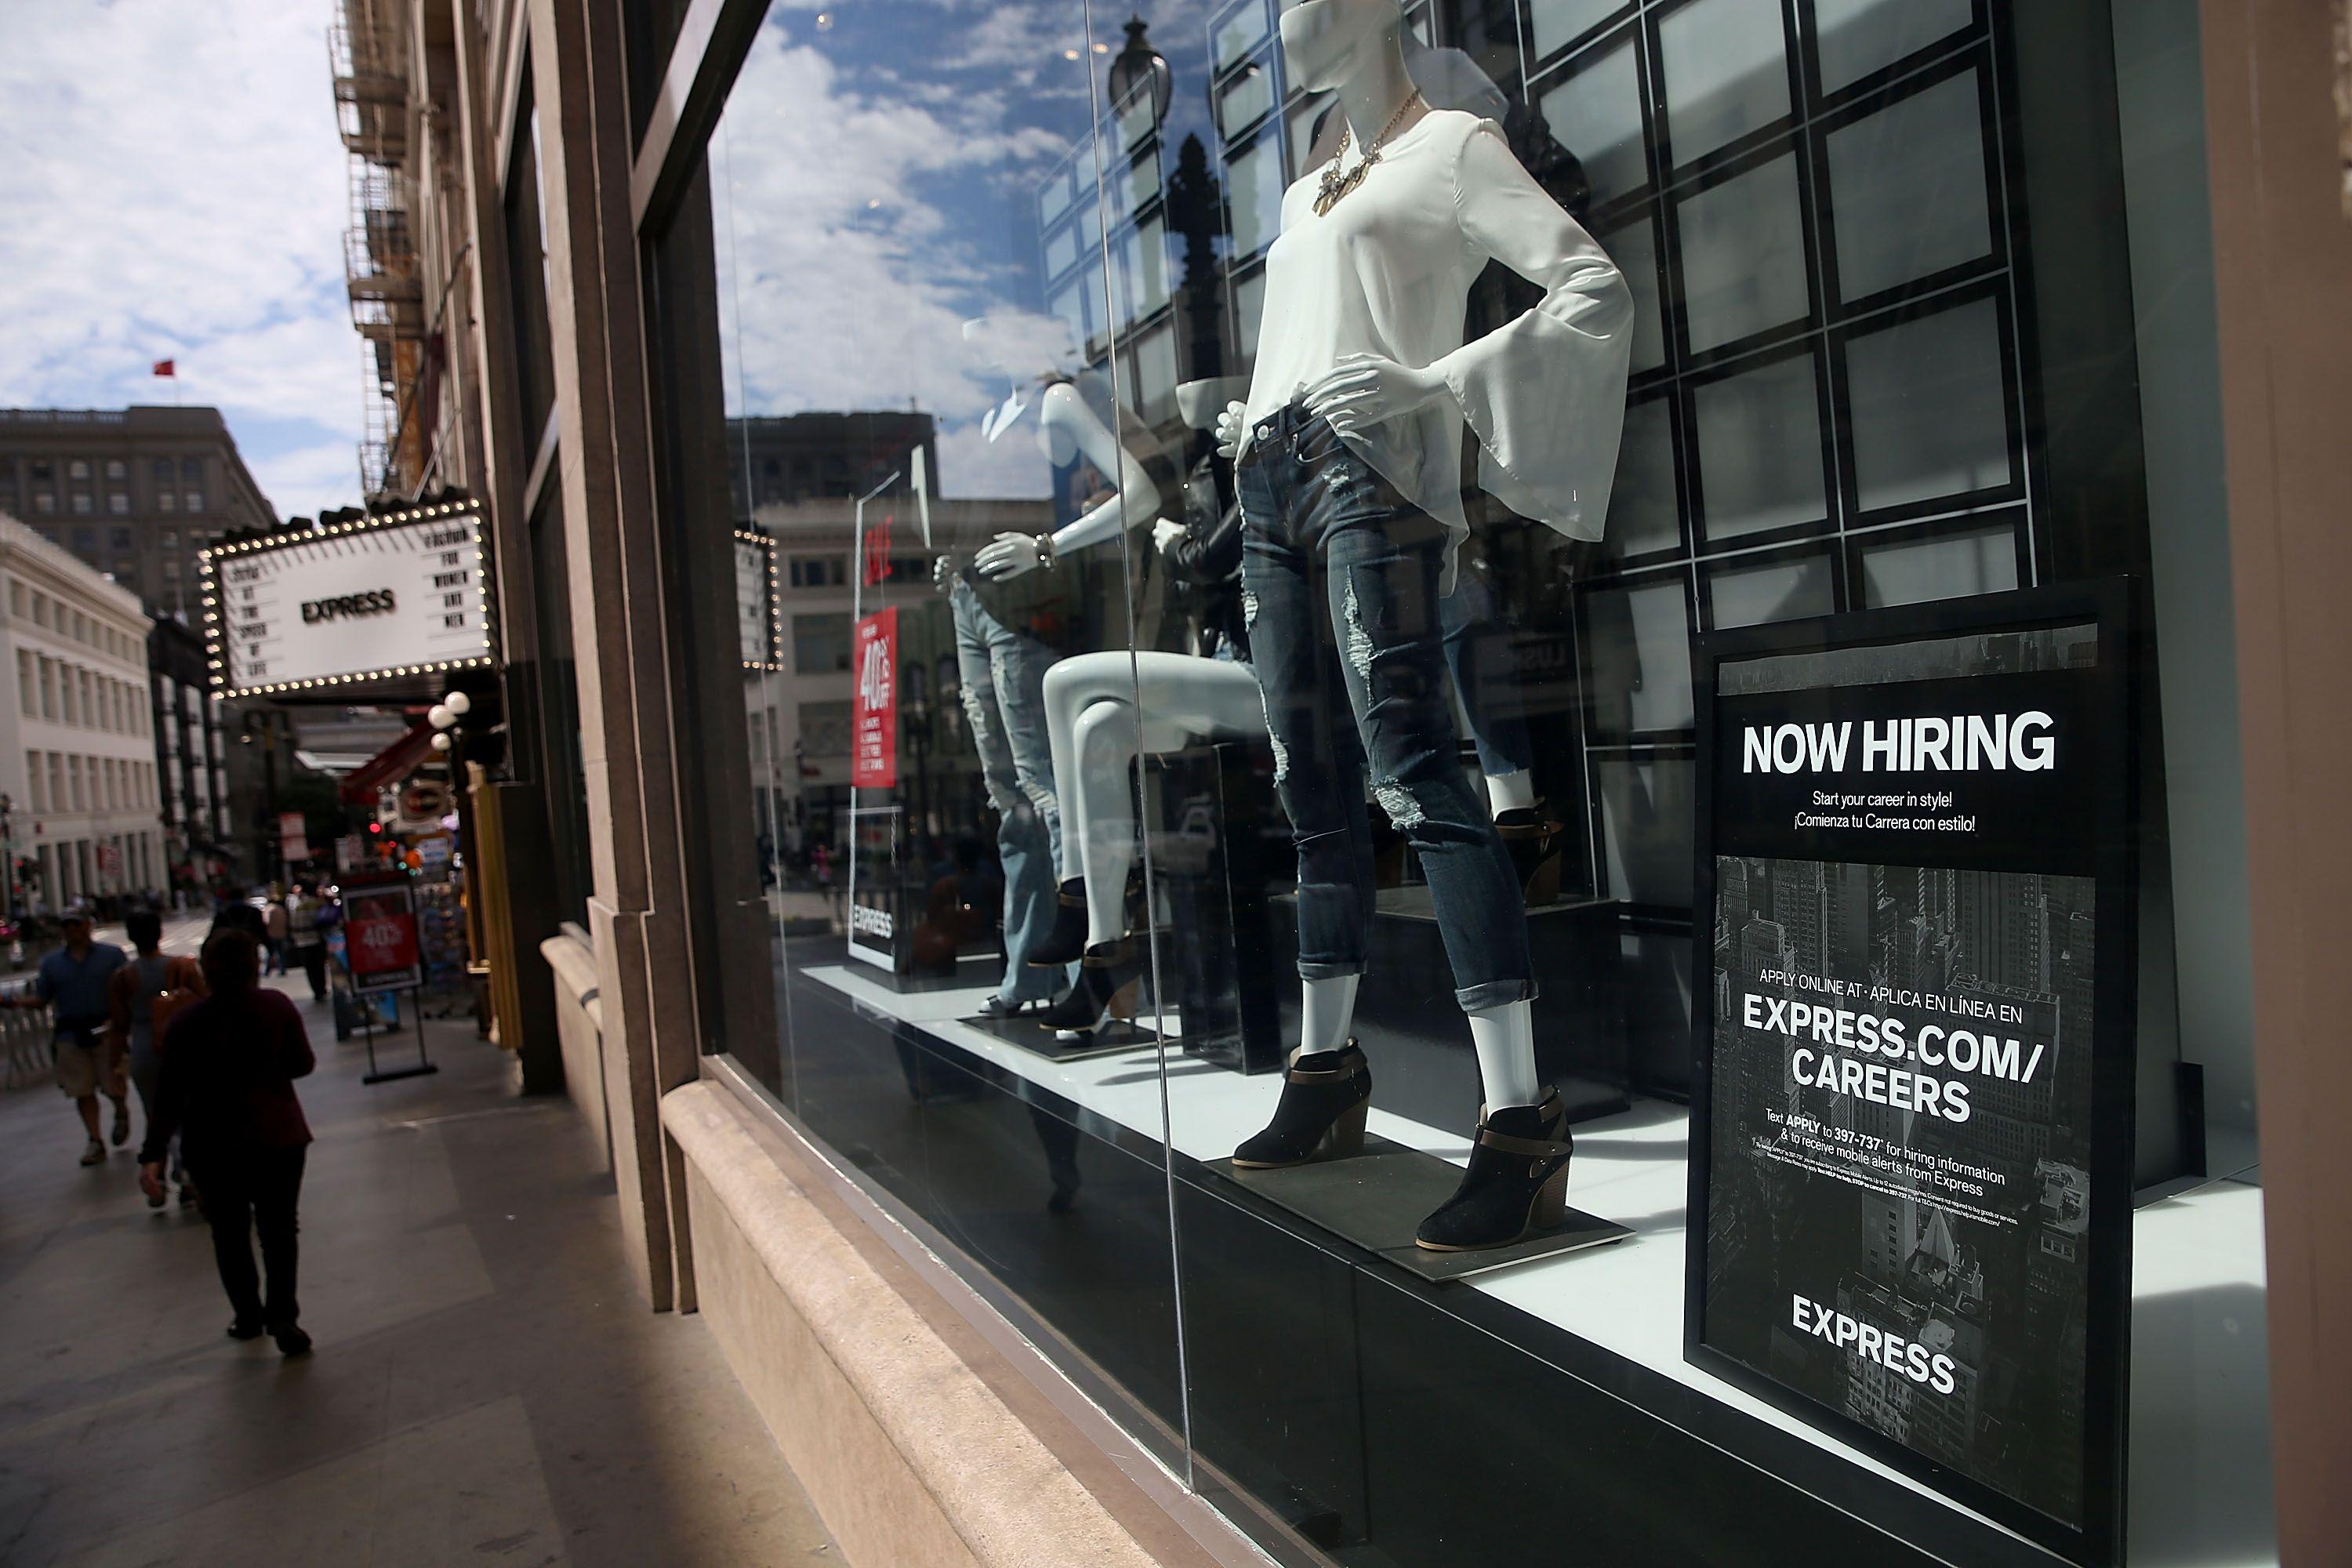 Express Clothing Store Logo - Clothing Sales at Express Tumbled More Than Expected Last Quarter